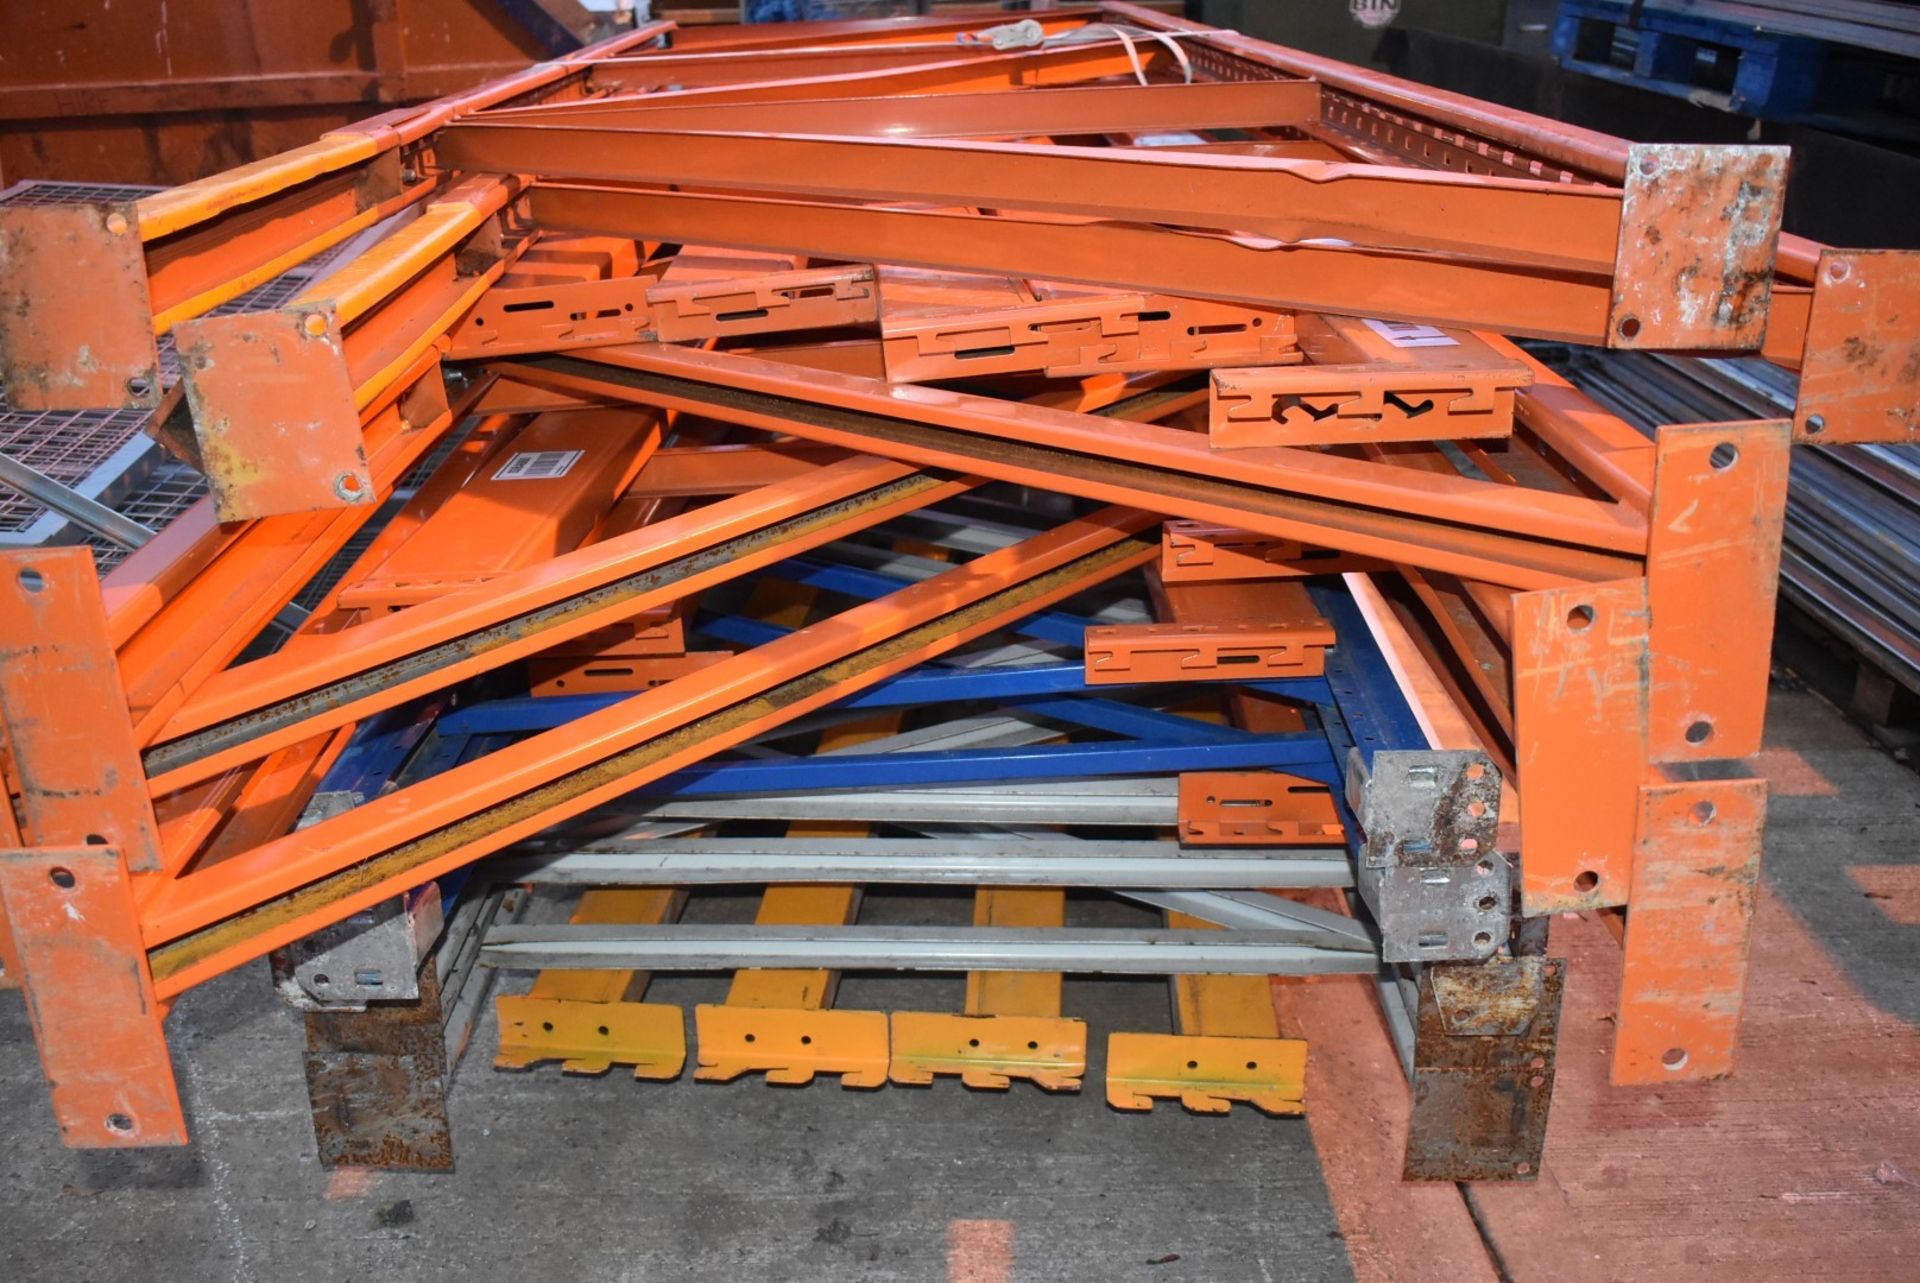 7 x Bays of Assort Pallet Racking - Includes 10 Uprights and 15 Crossbeams - Ref: MPC - CL011 - - Image 7 of 7